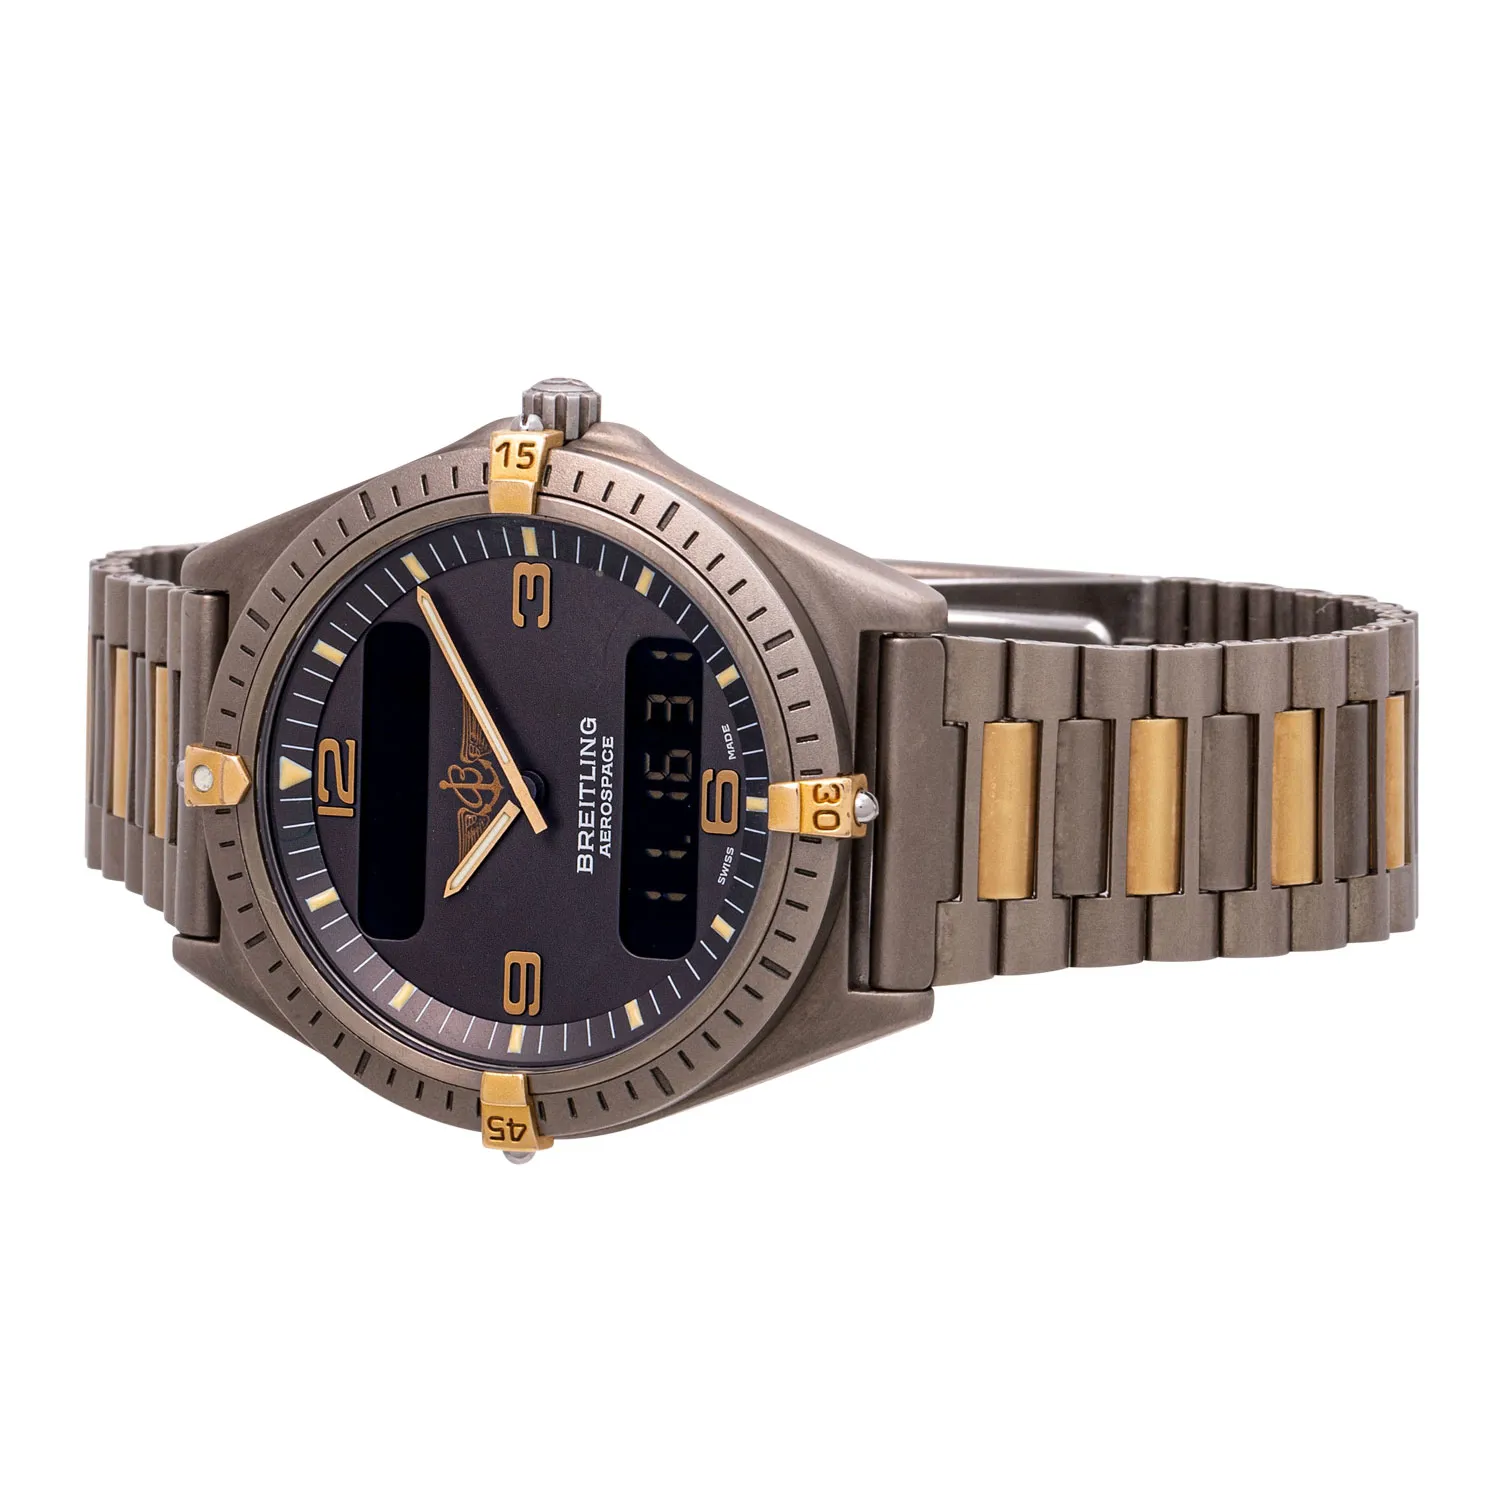 Breitling Aerospace F56061 40mm Titanium and gold-plated 3